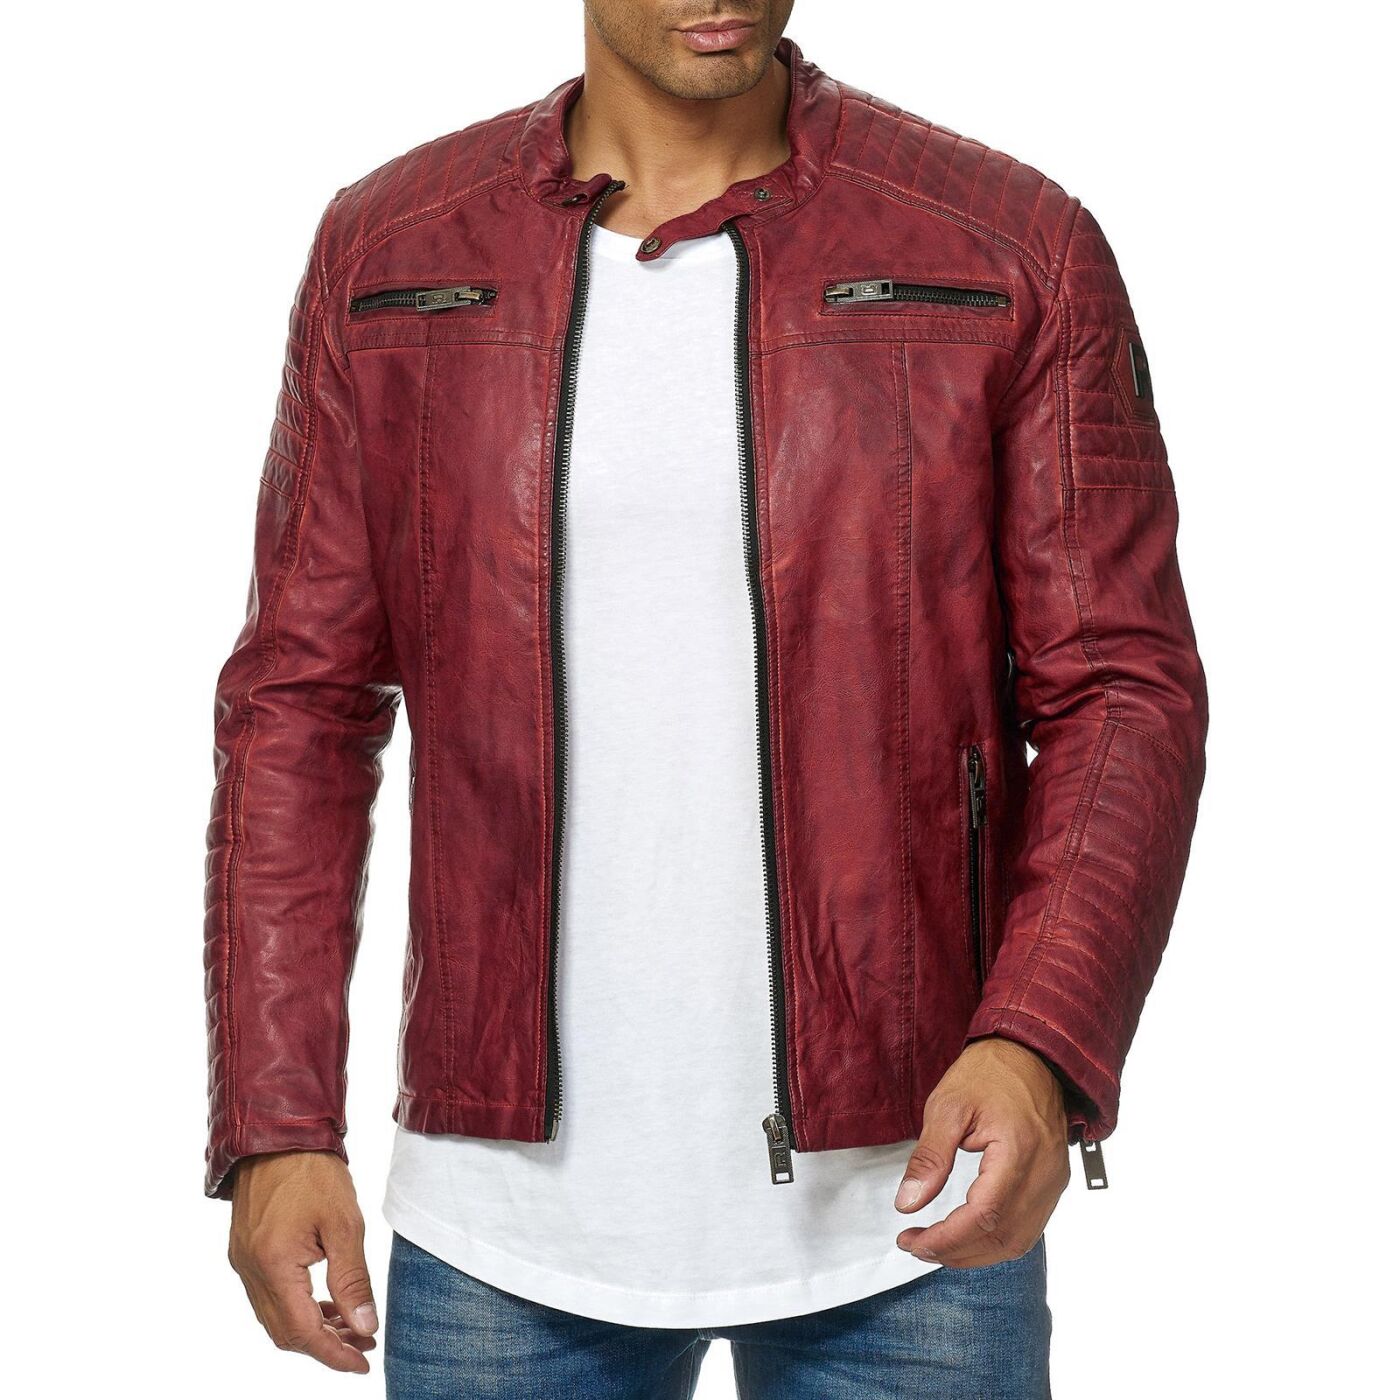 Fashion Jackets Faux Leather Jacket H&M Faux Leather Jacket red quilting pattern casual look 